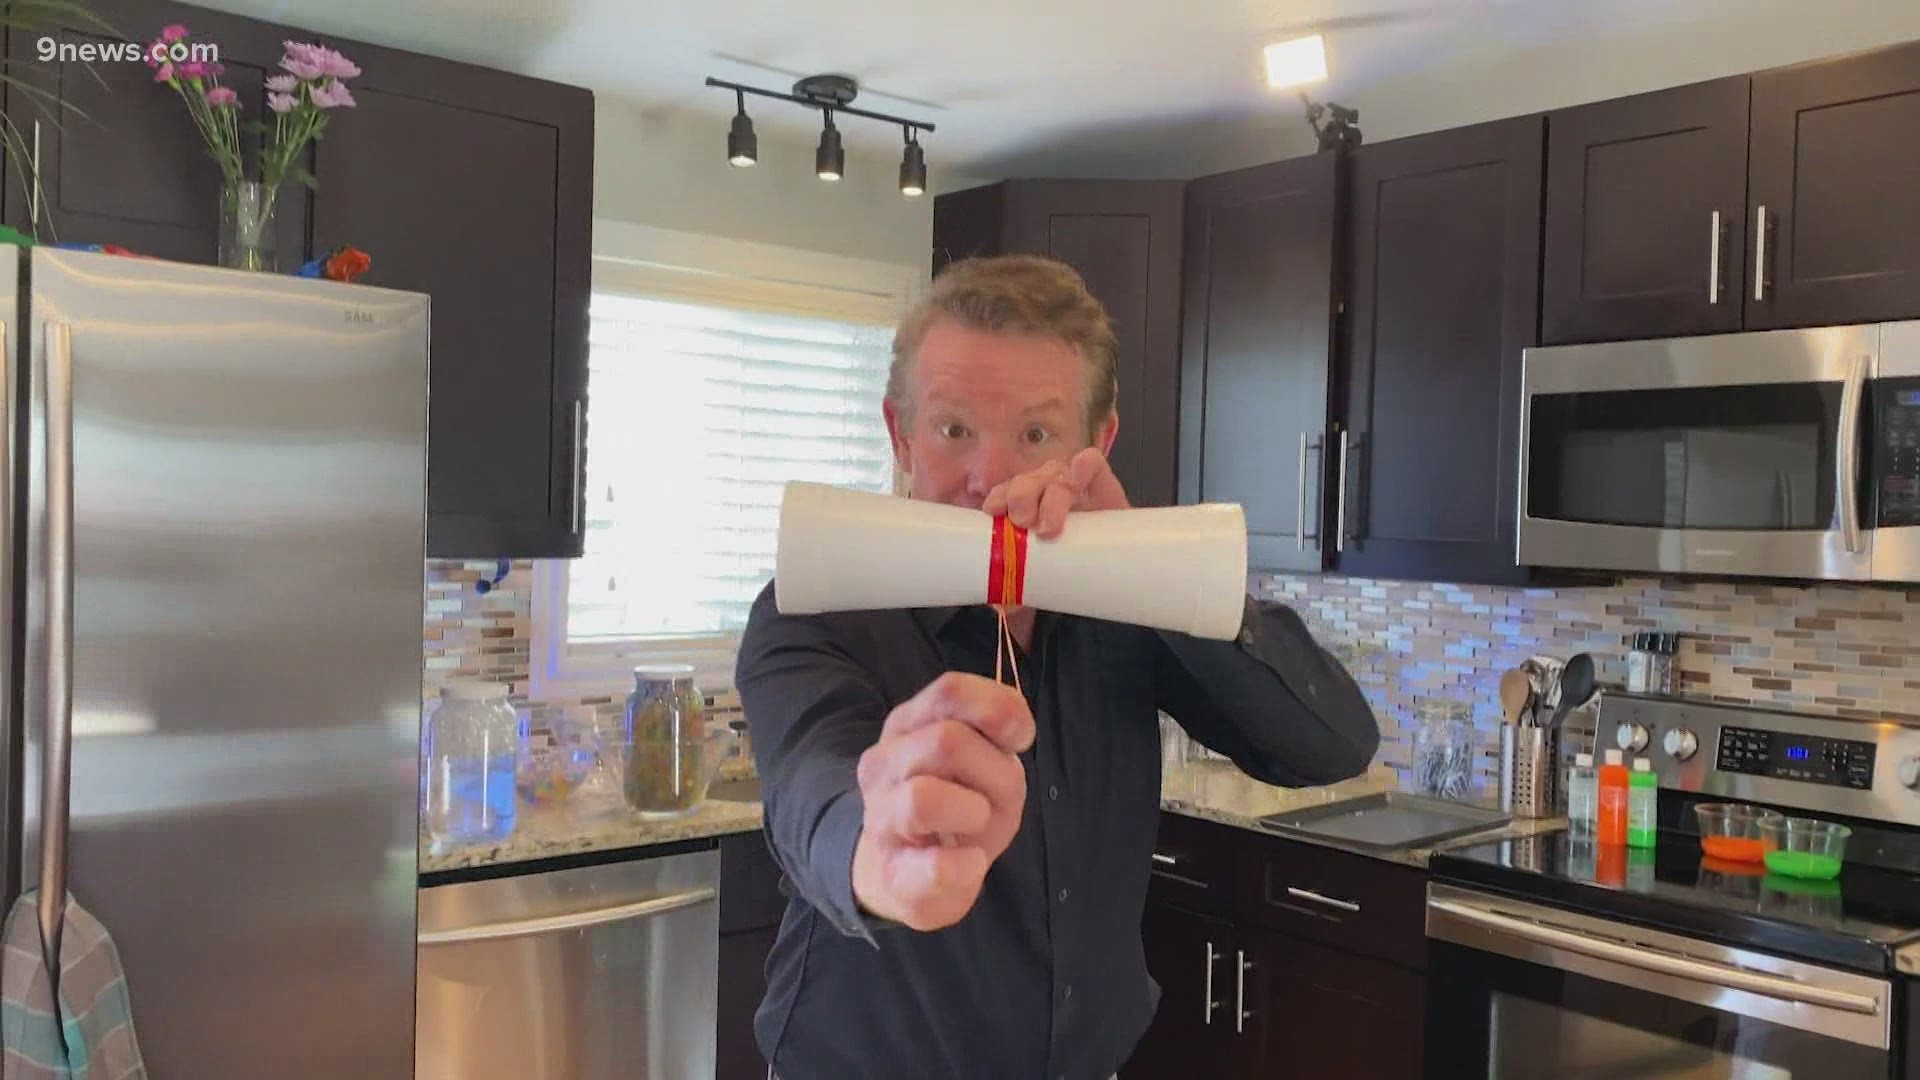 With all this heat, you might need something fun to do inside with the kids. Steve Spangler shows how to make cups fly with rubber bands and styrofoam cups.